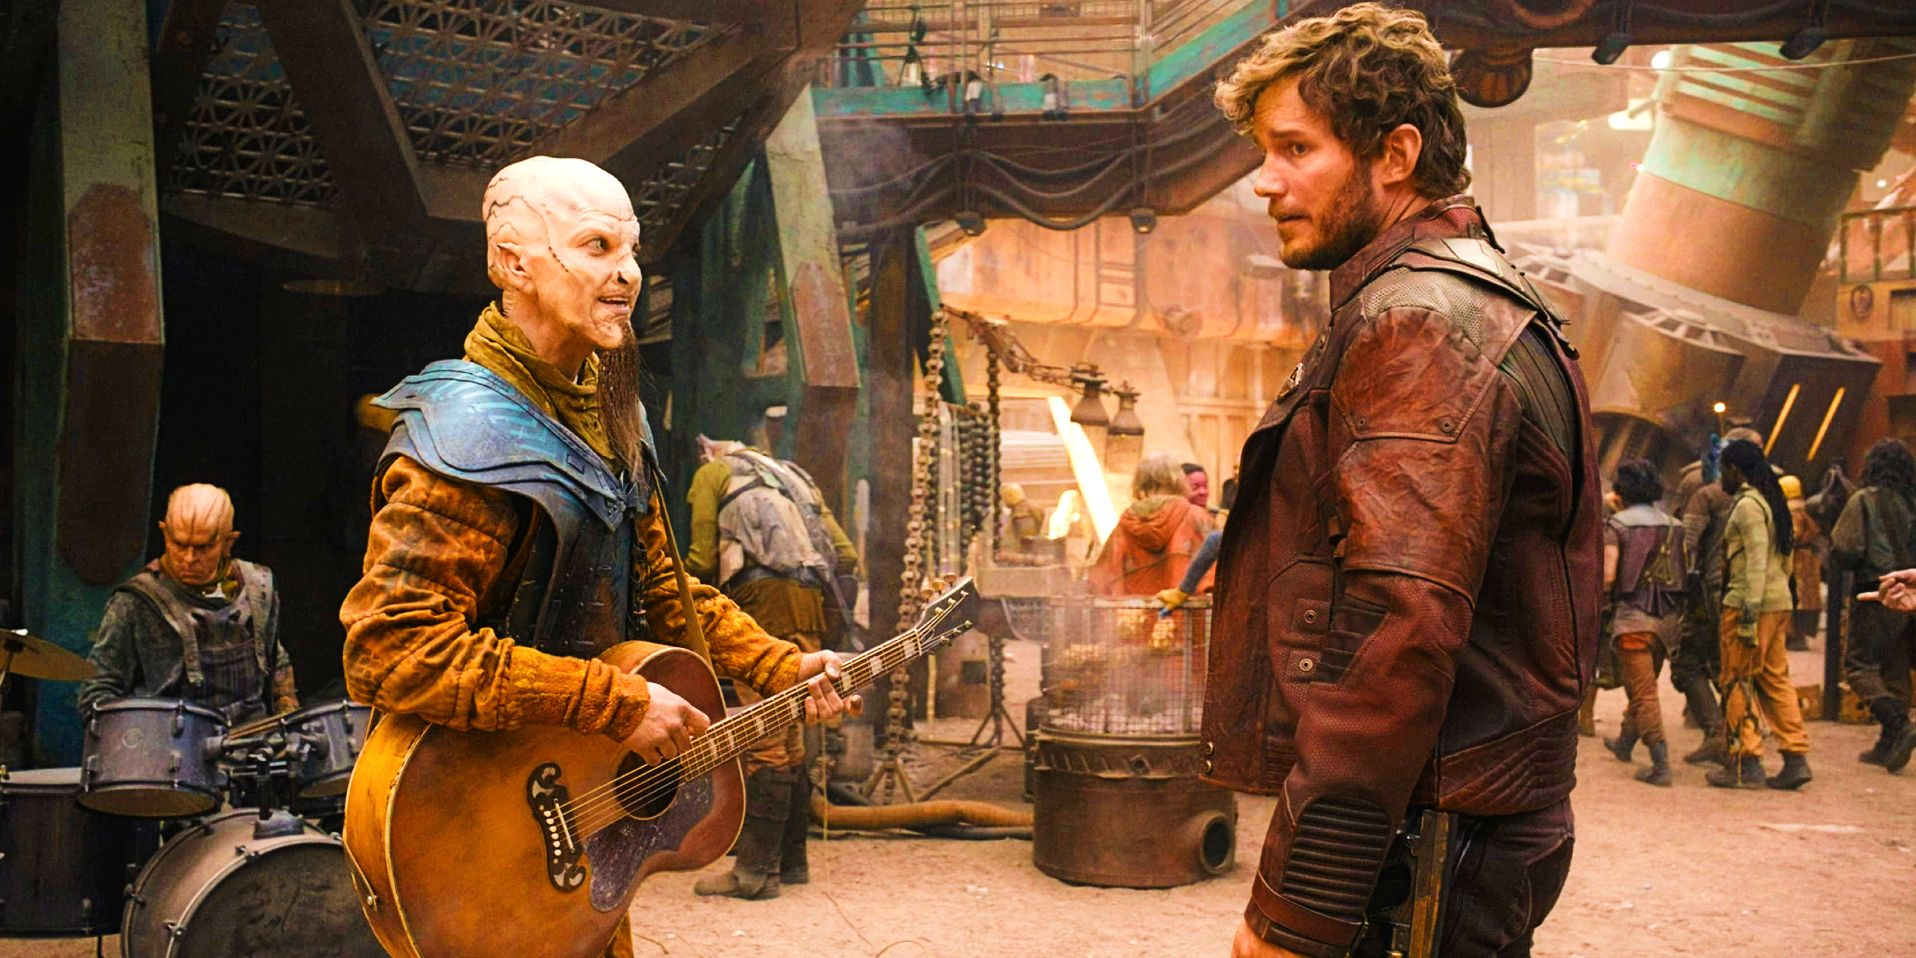 Rhett Miller as Bzermikitokolok playing guitar and singing to Chris Pratt as Peter Quill Star-Lord in The Guardians of the Galaxy Holiday Special